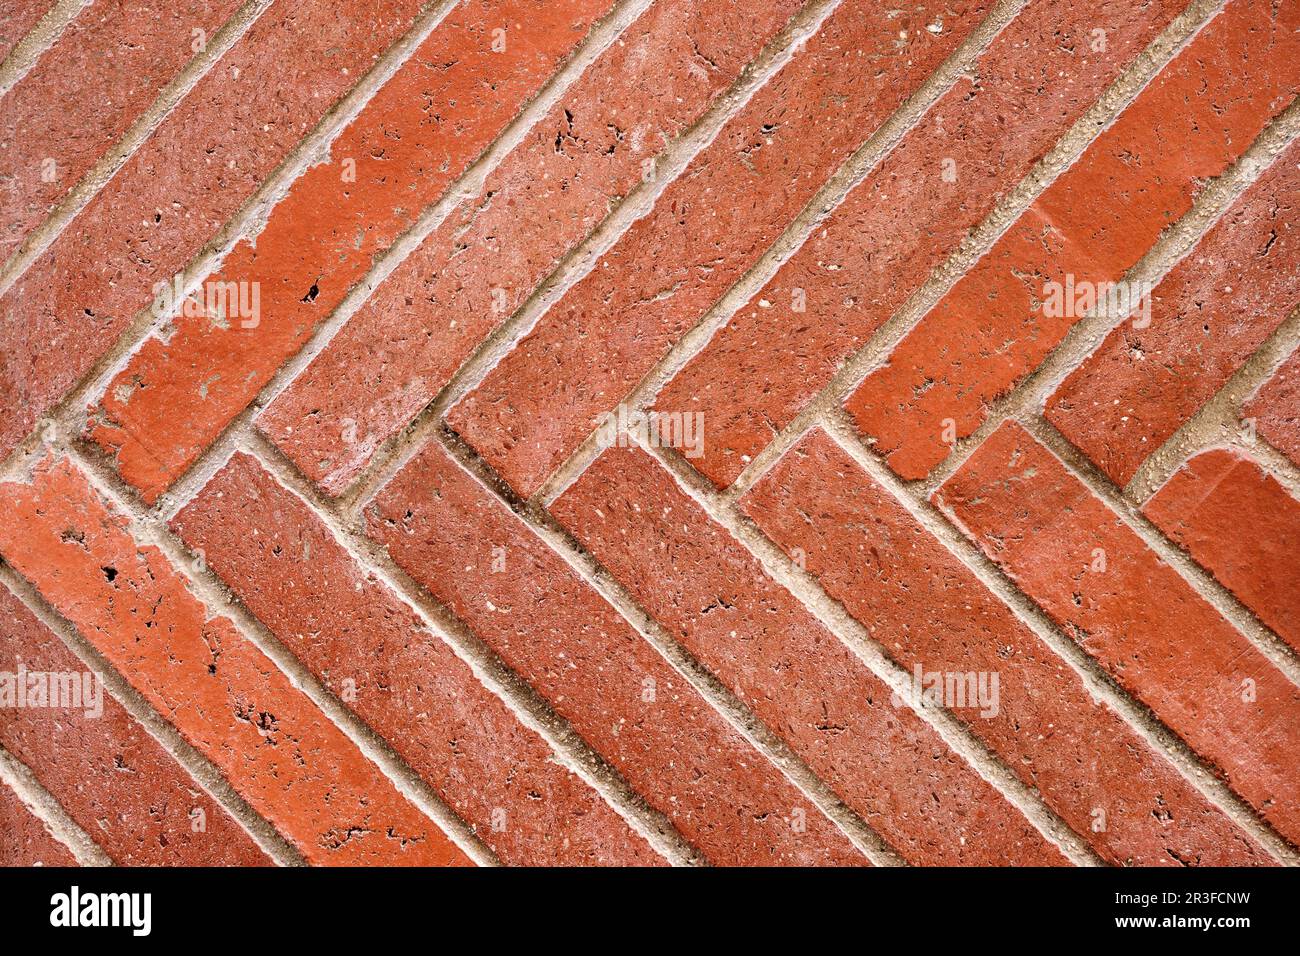 Background from a wall made of diagonal red clinker bricks Stock Photo